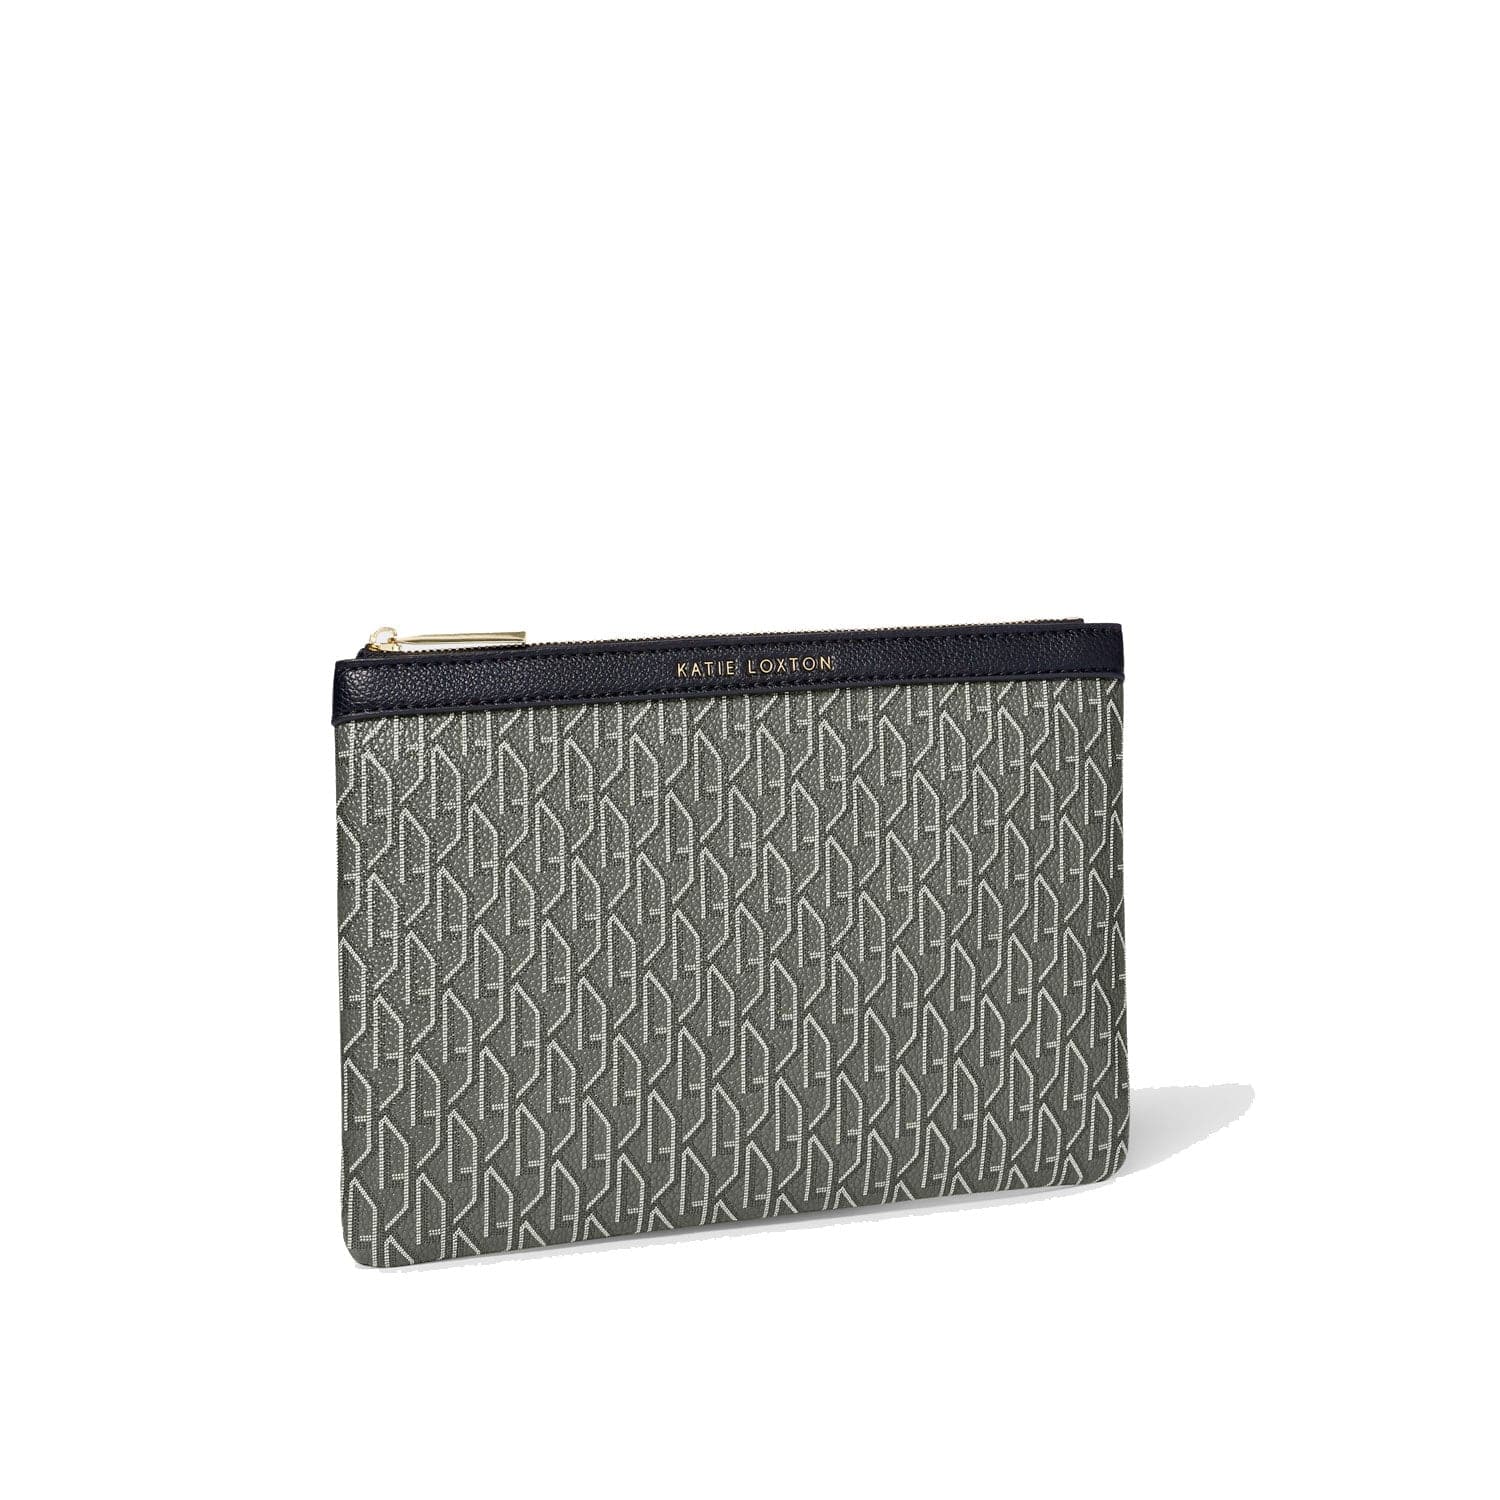 Katie Loxton Pouch Black Katie Loxton Signature Pouch - Black / Taupe / Off White / Emerald Green / Chocolate